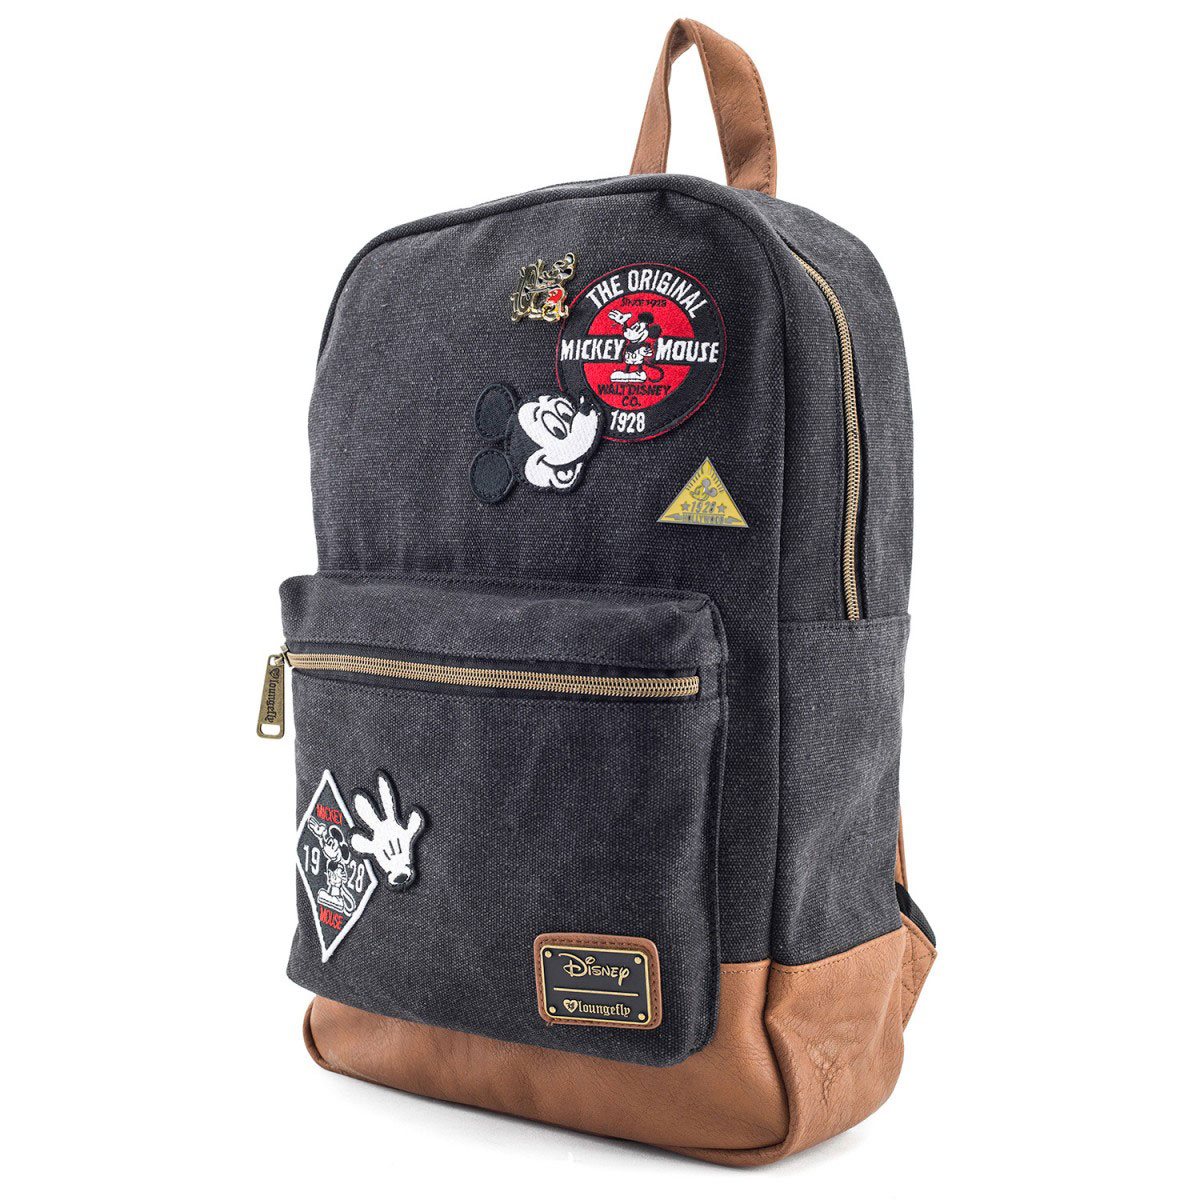 Mickey Mouse Patches Denim Backpack